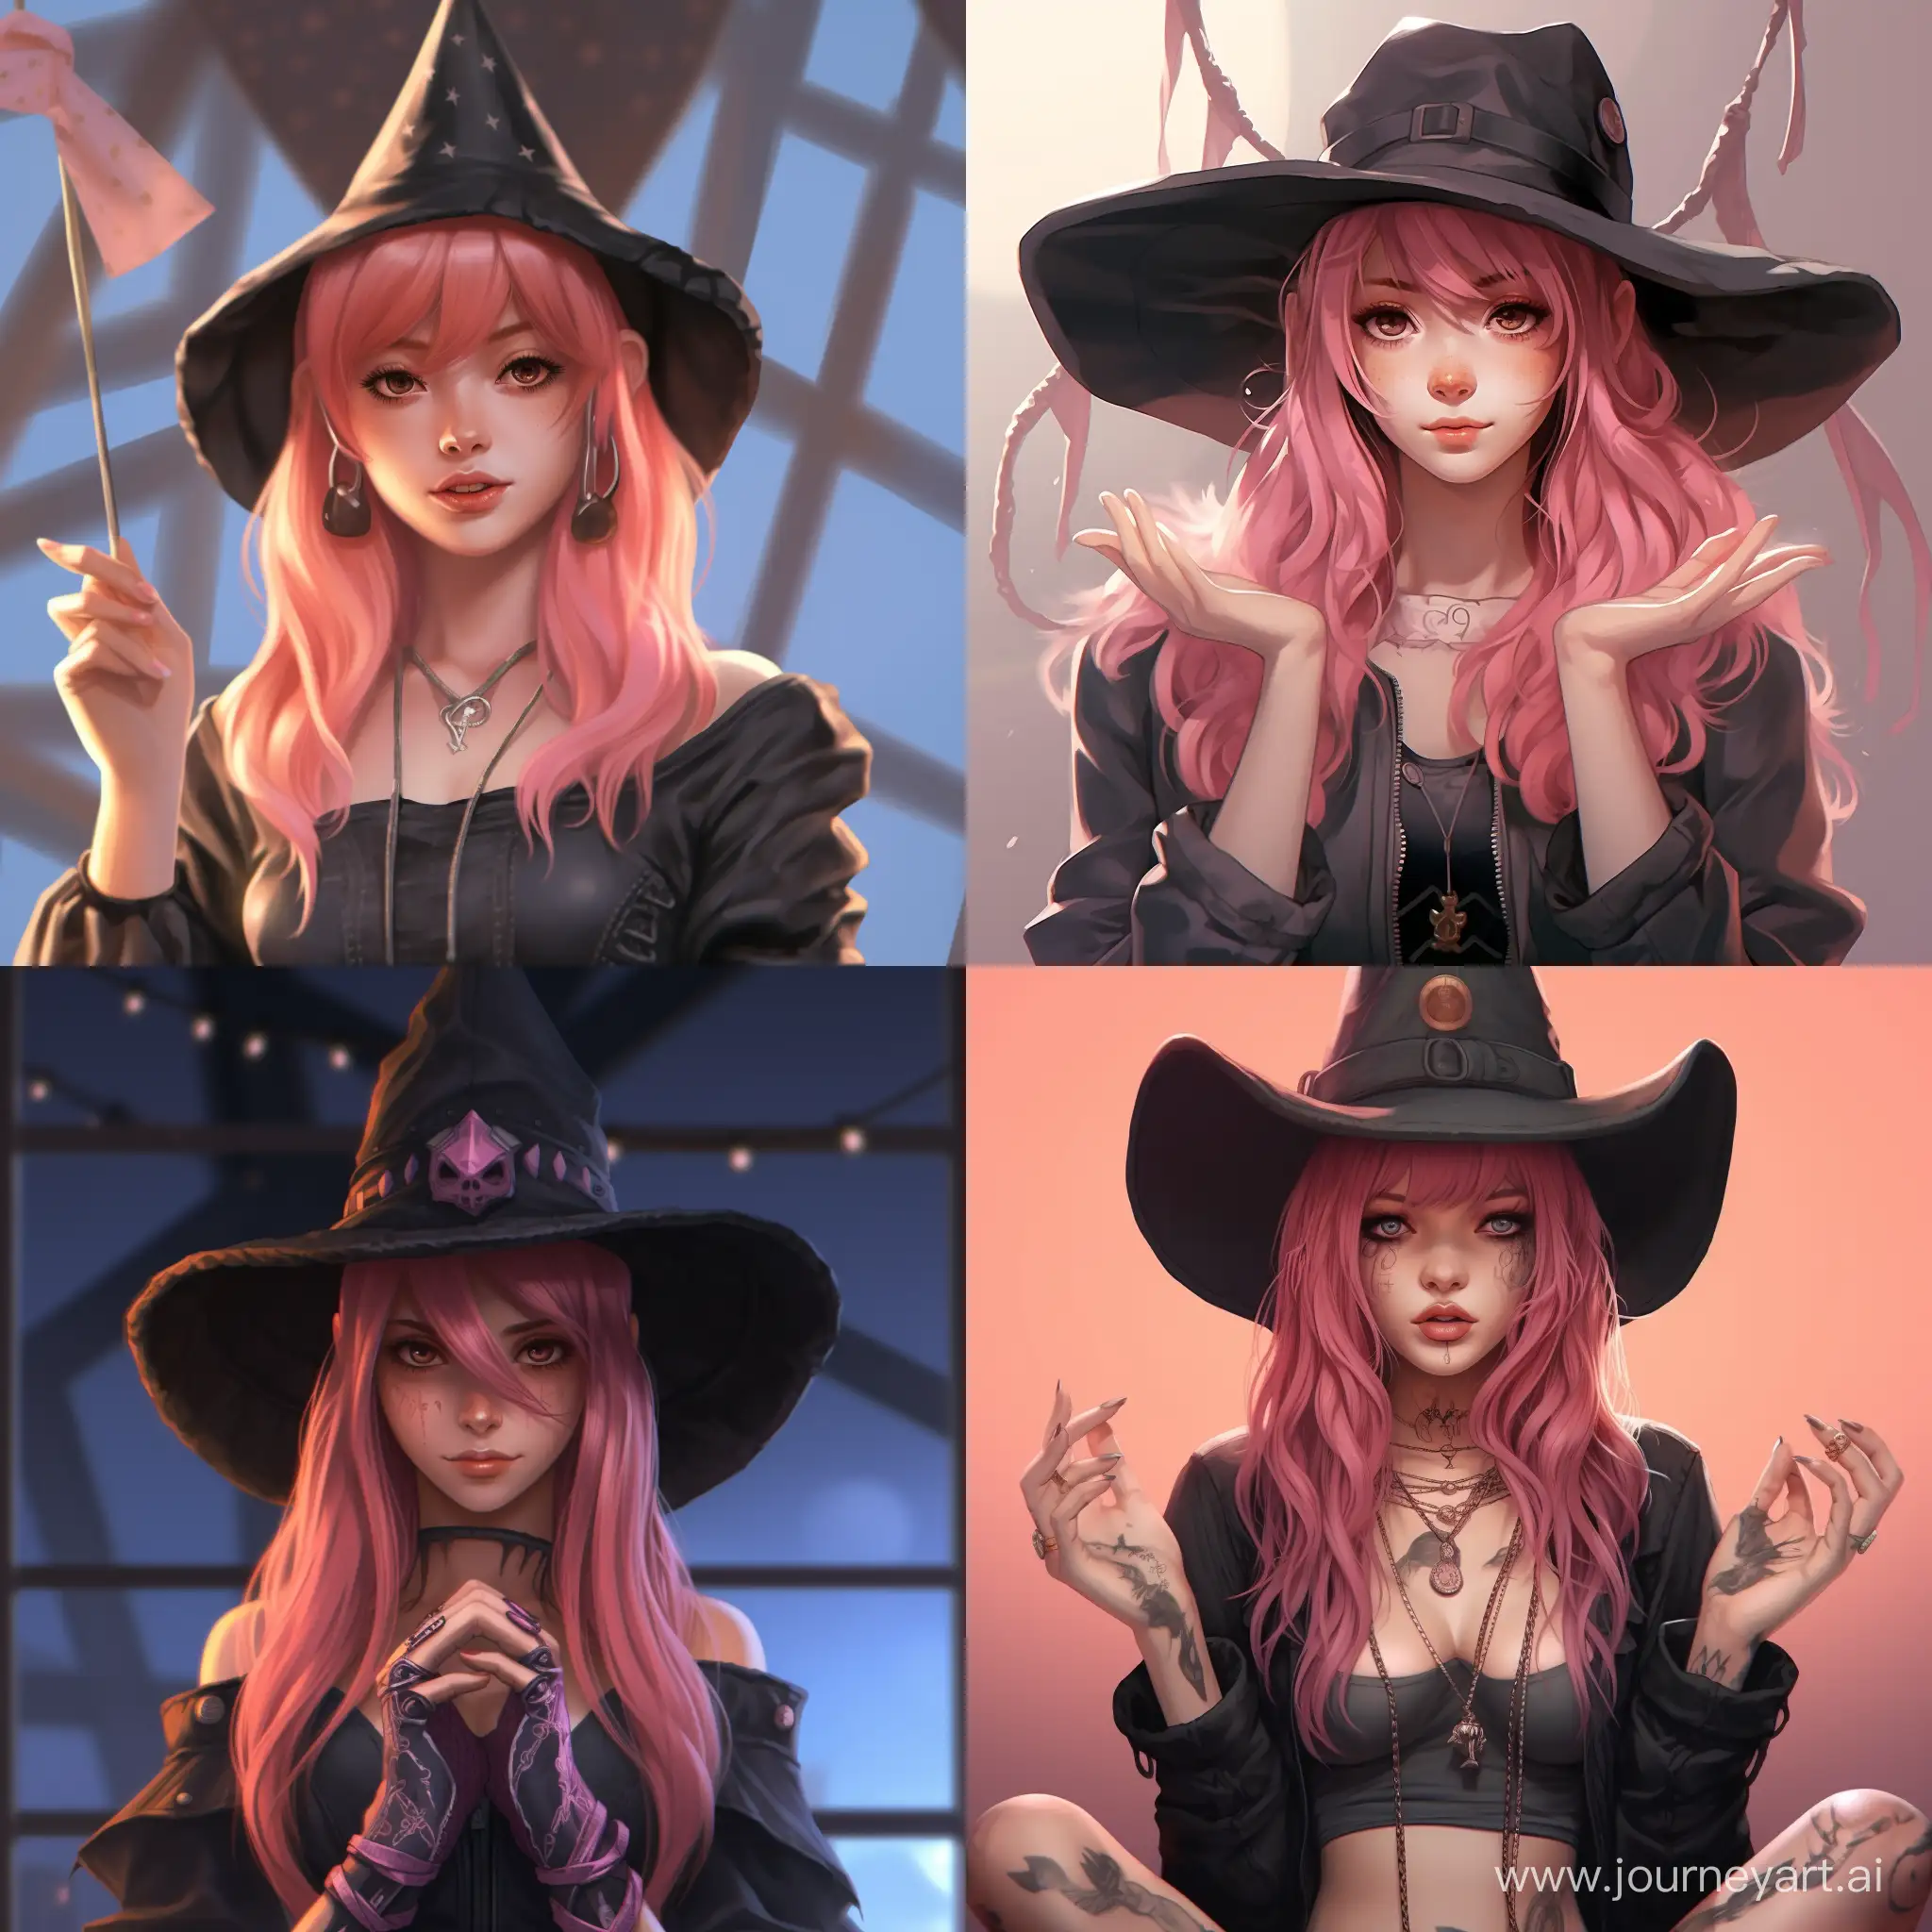 Defiant-Anime-Witch-with-Pink-Hair-in-11-Aspect-Ratio